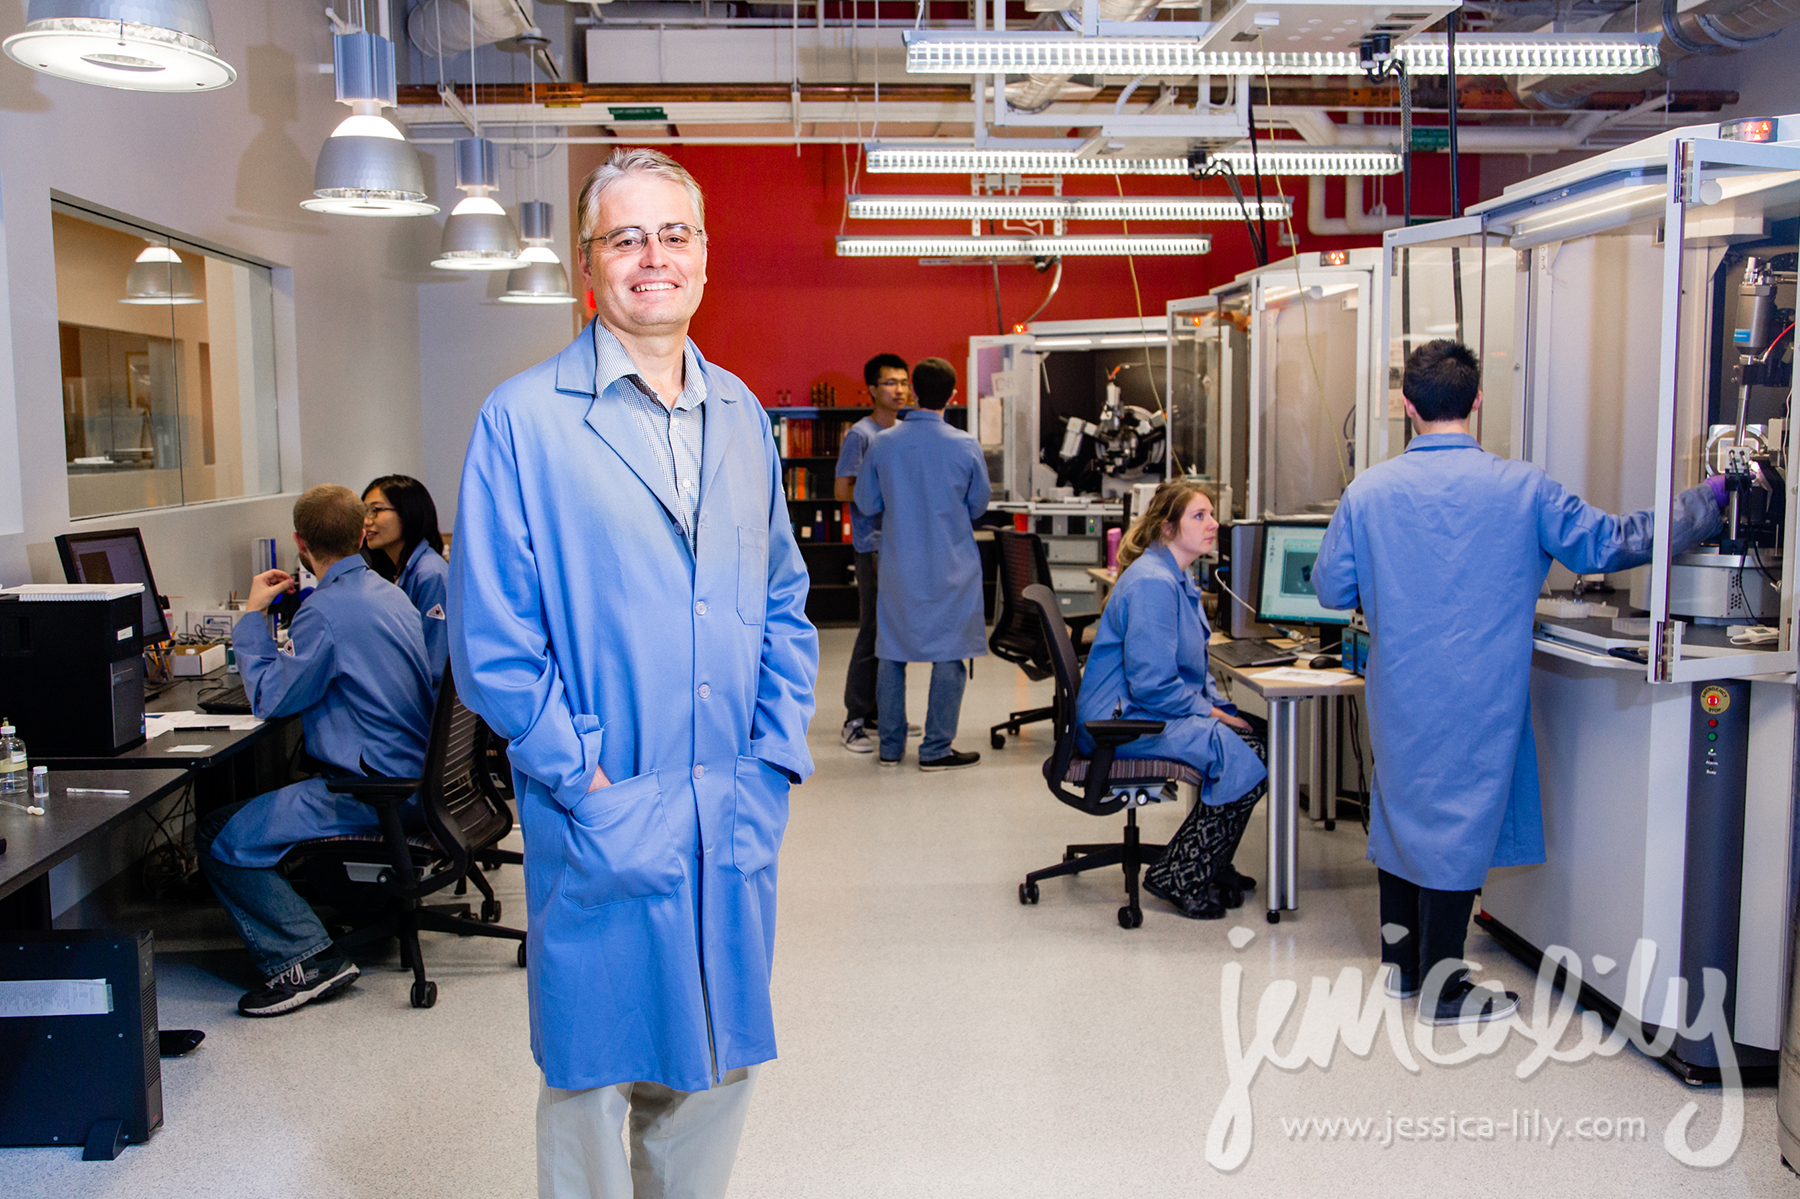 Emory University Chemistry with Dir. John Basca by Jessica Lily - Images that Capture the Essence of Your Work